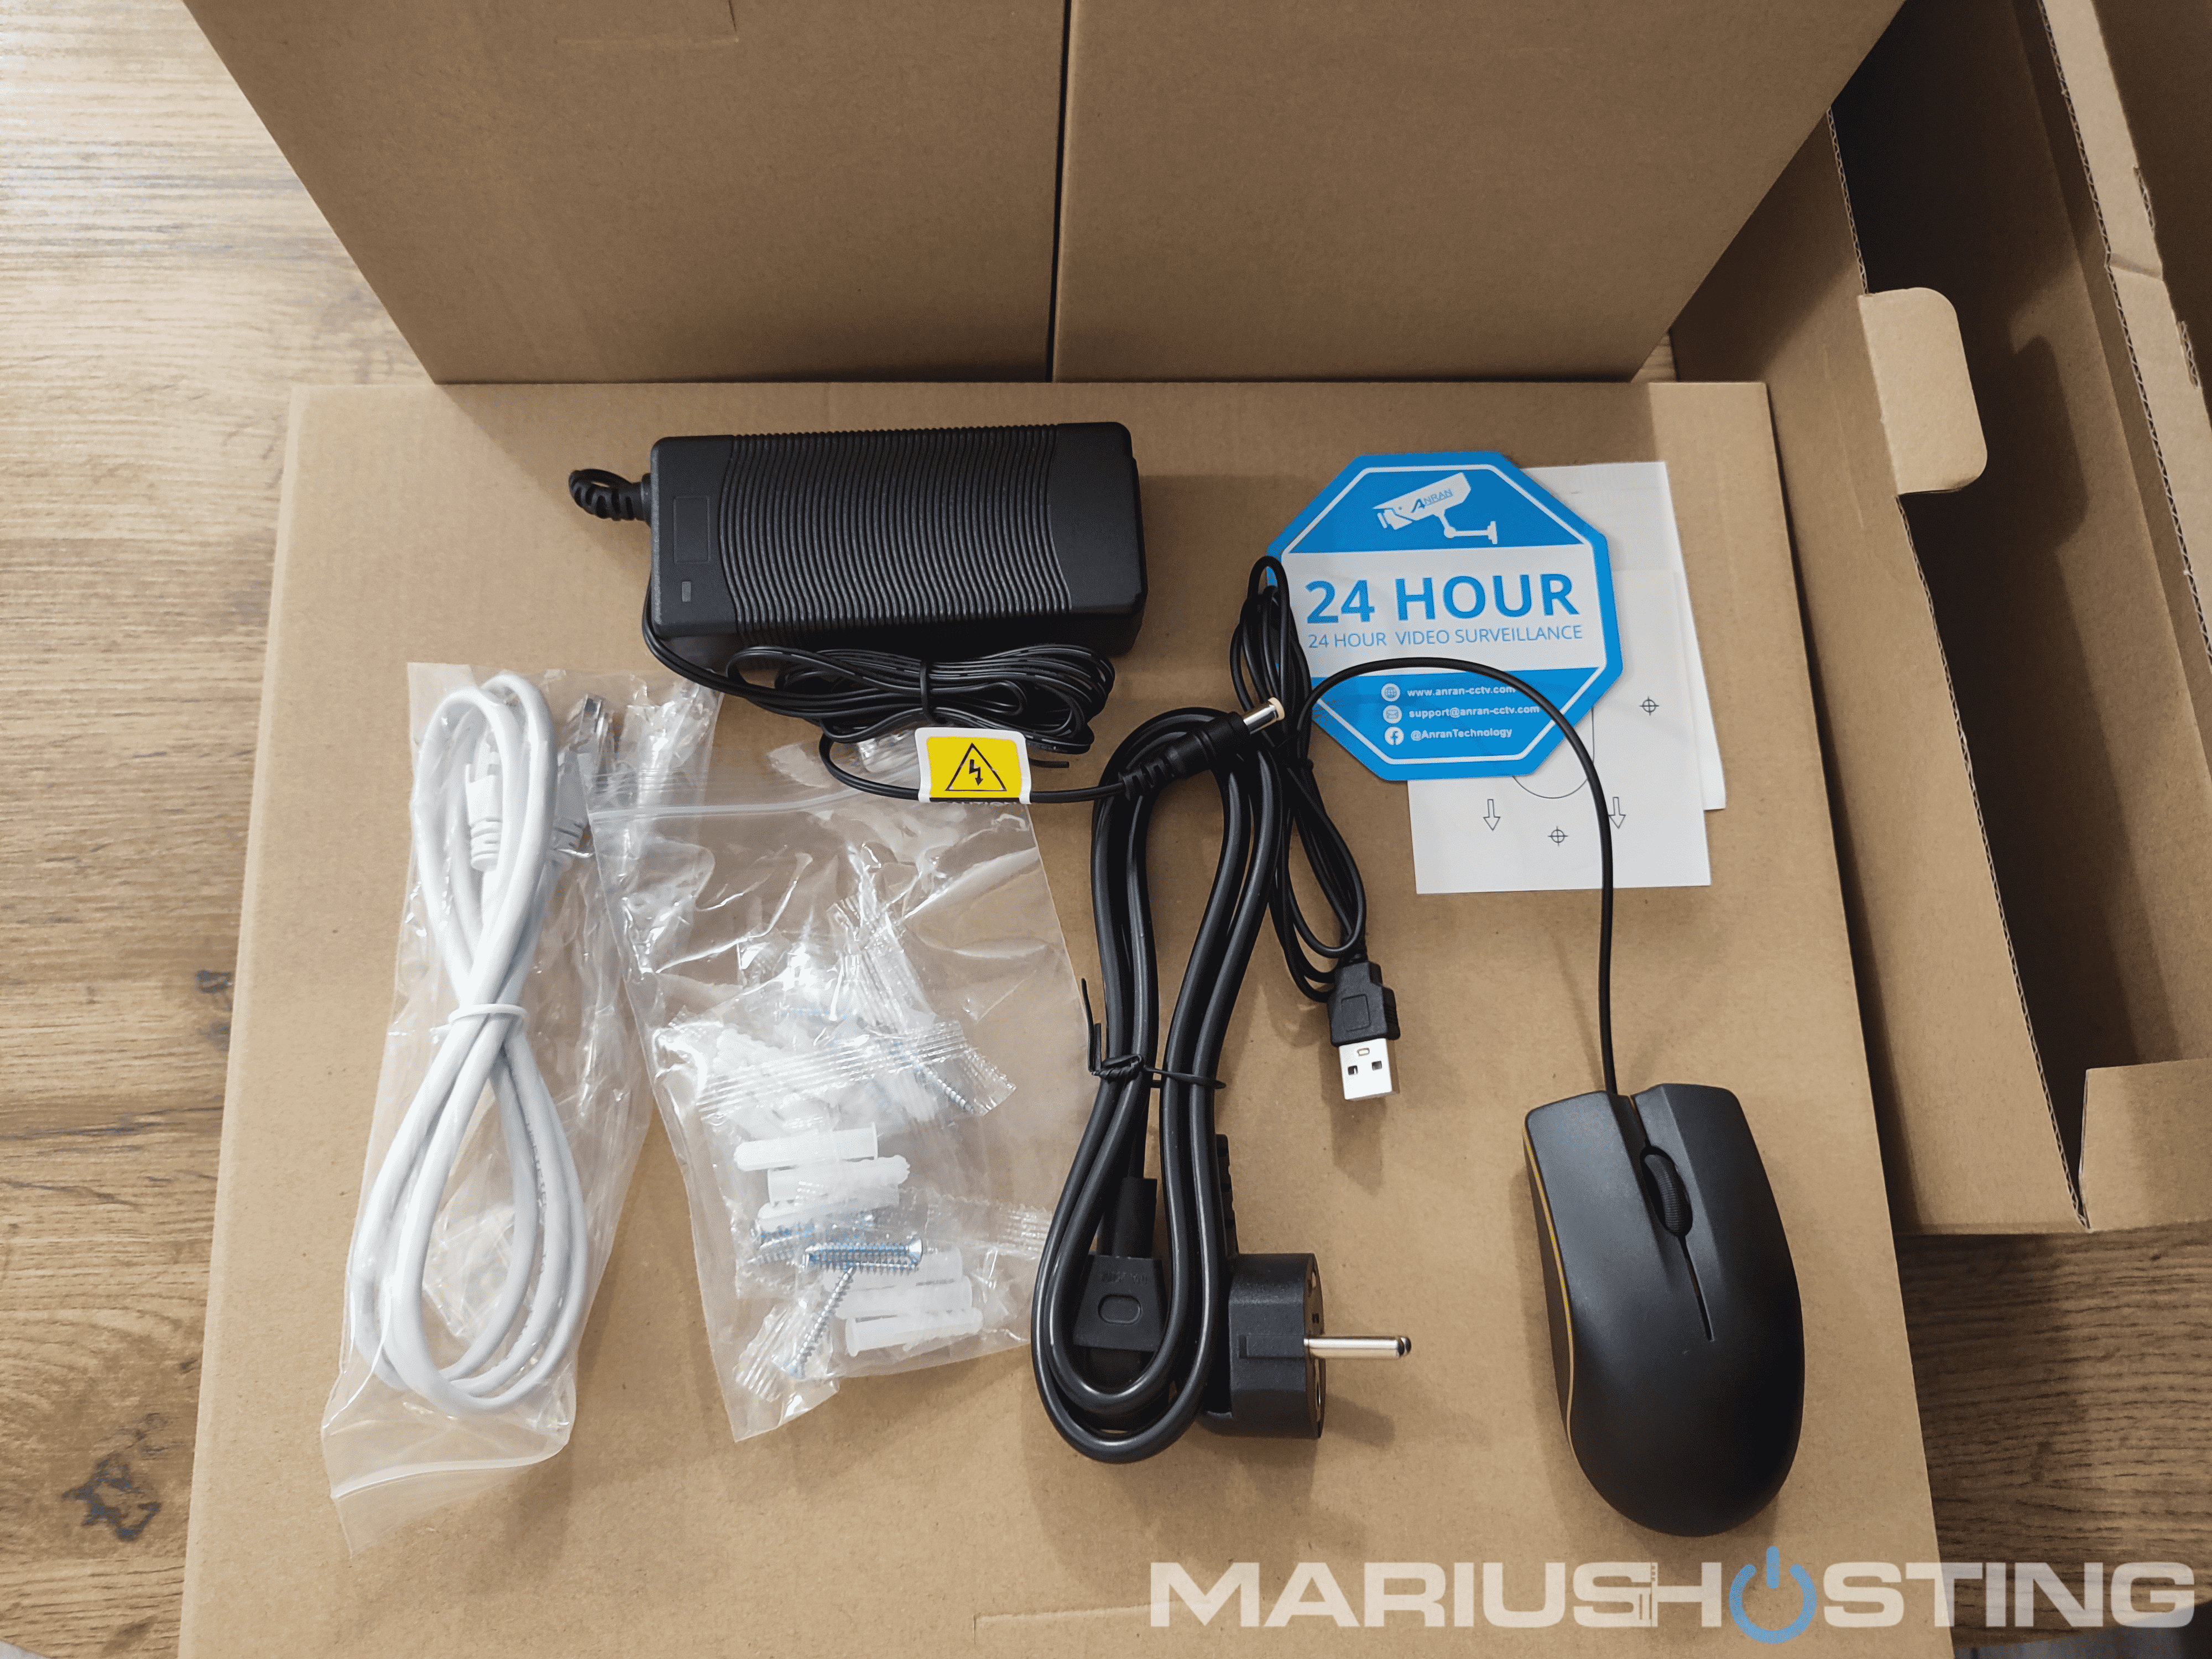 ANRAN 5MP PoE Security Camera Review 8